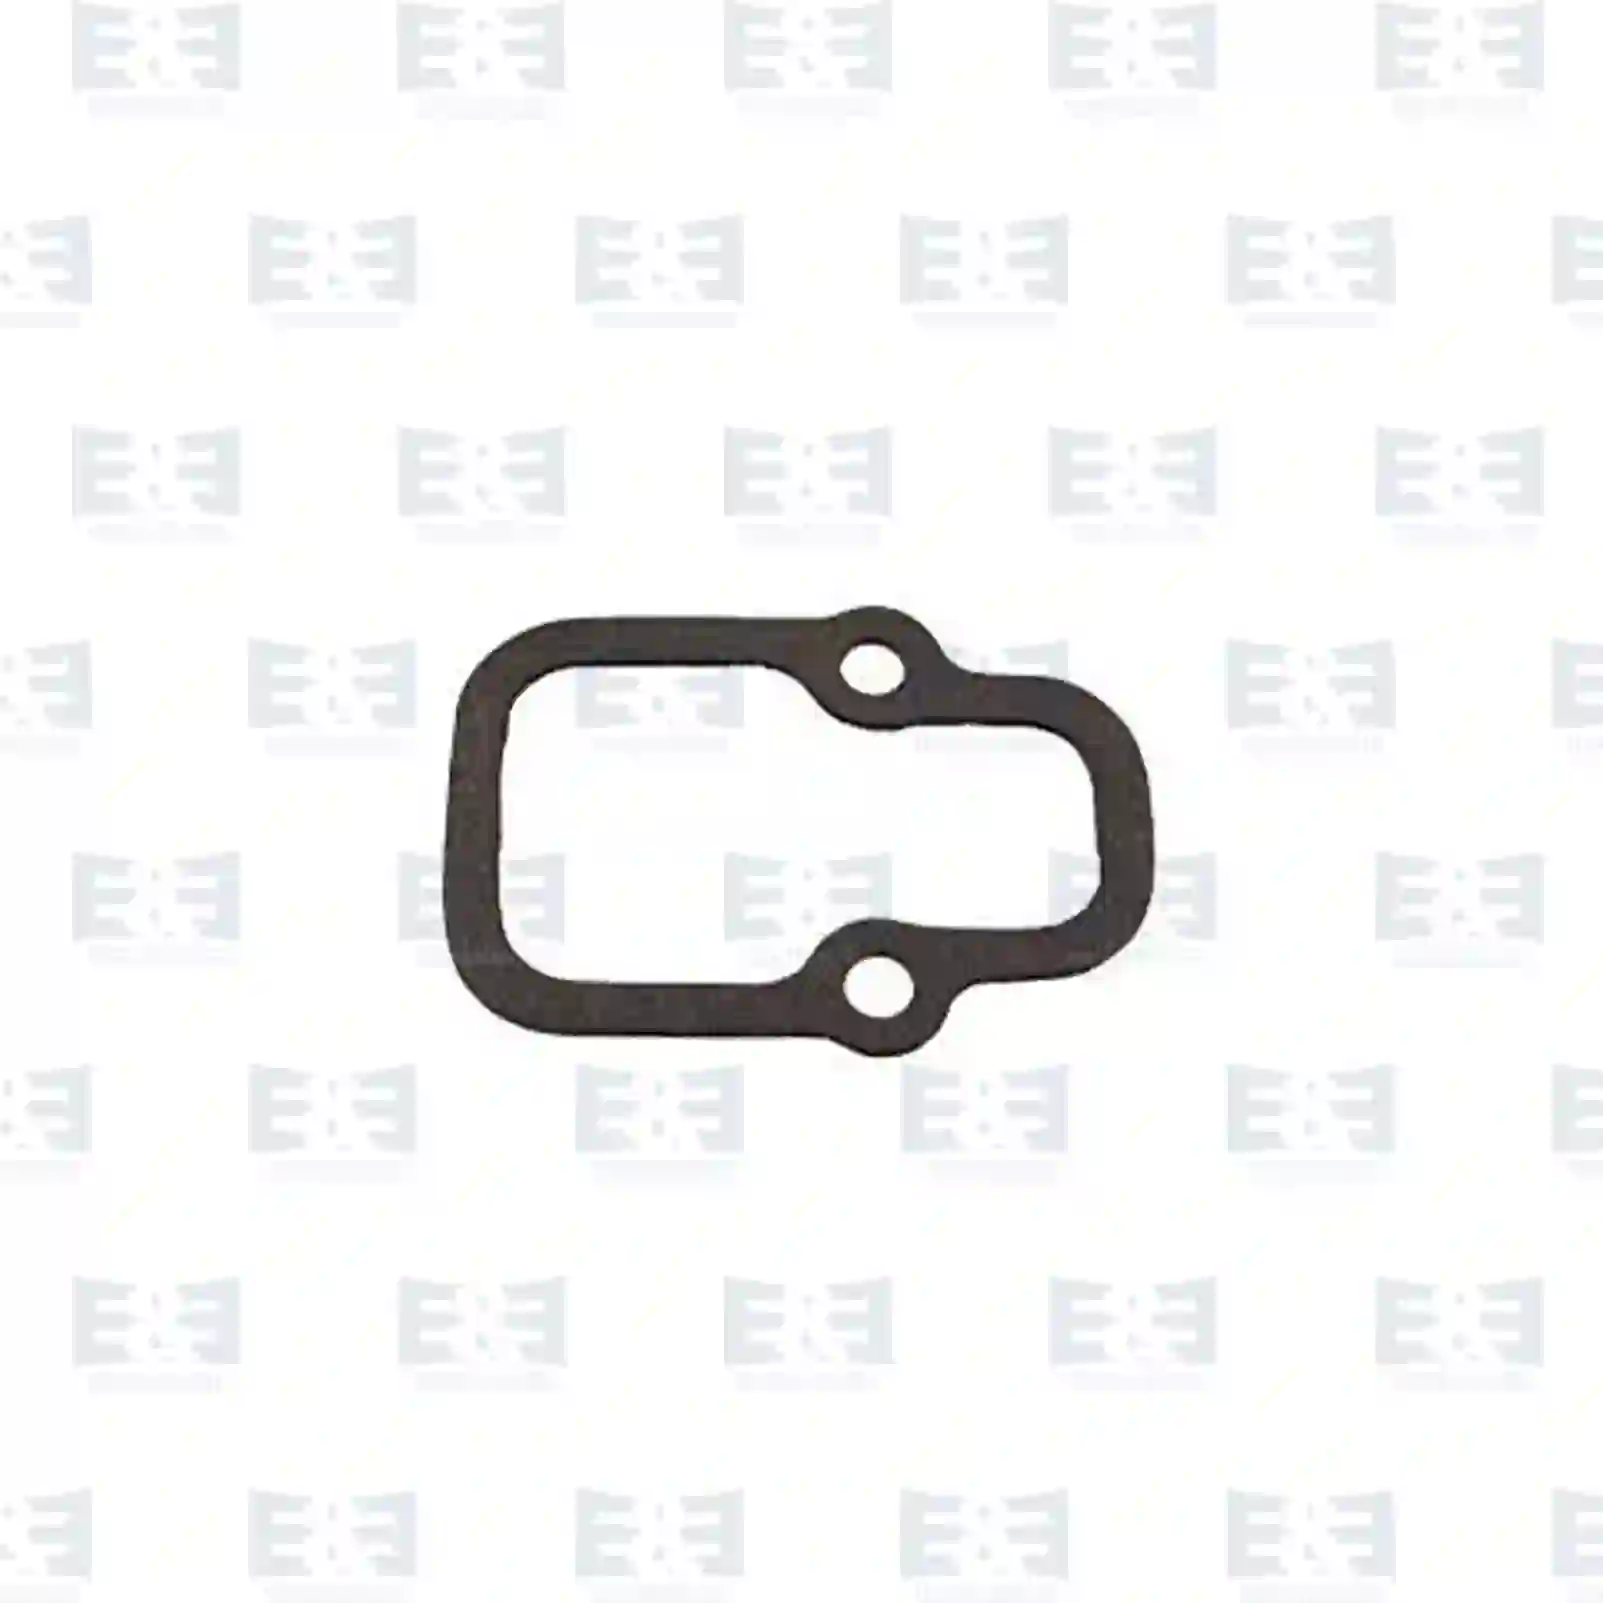 Intake Manifold Gasket, intake manifold, EE No 2E2209832 ,  oem no:51089020054, 51089020078, 51089020079, 51089020115, 51089020135, 51089020161, 82089020001, 93212870194, 4031410380, 4031410980, 4031411080, 4031411180, 4241410480, 4421410480, 4421411080, 4421411780, 4421411880, 4421411980 E&E Truck Spare Parts | Truck Spare Parts, Auotomotive Spare Parts